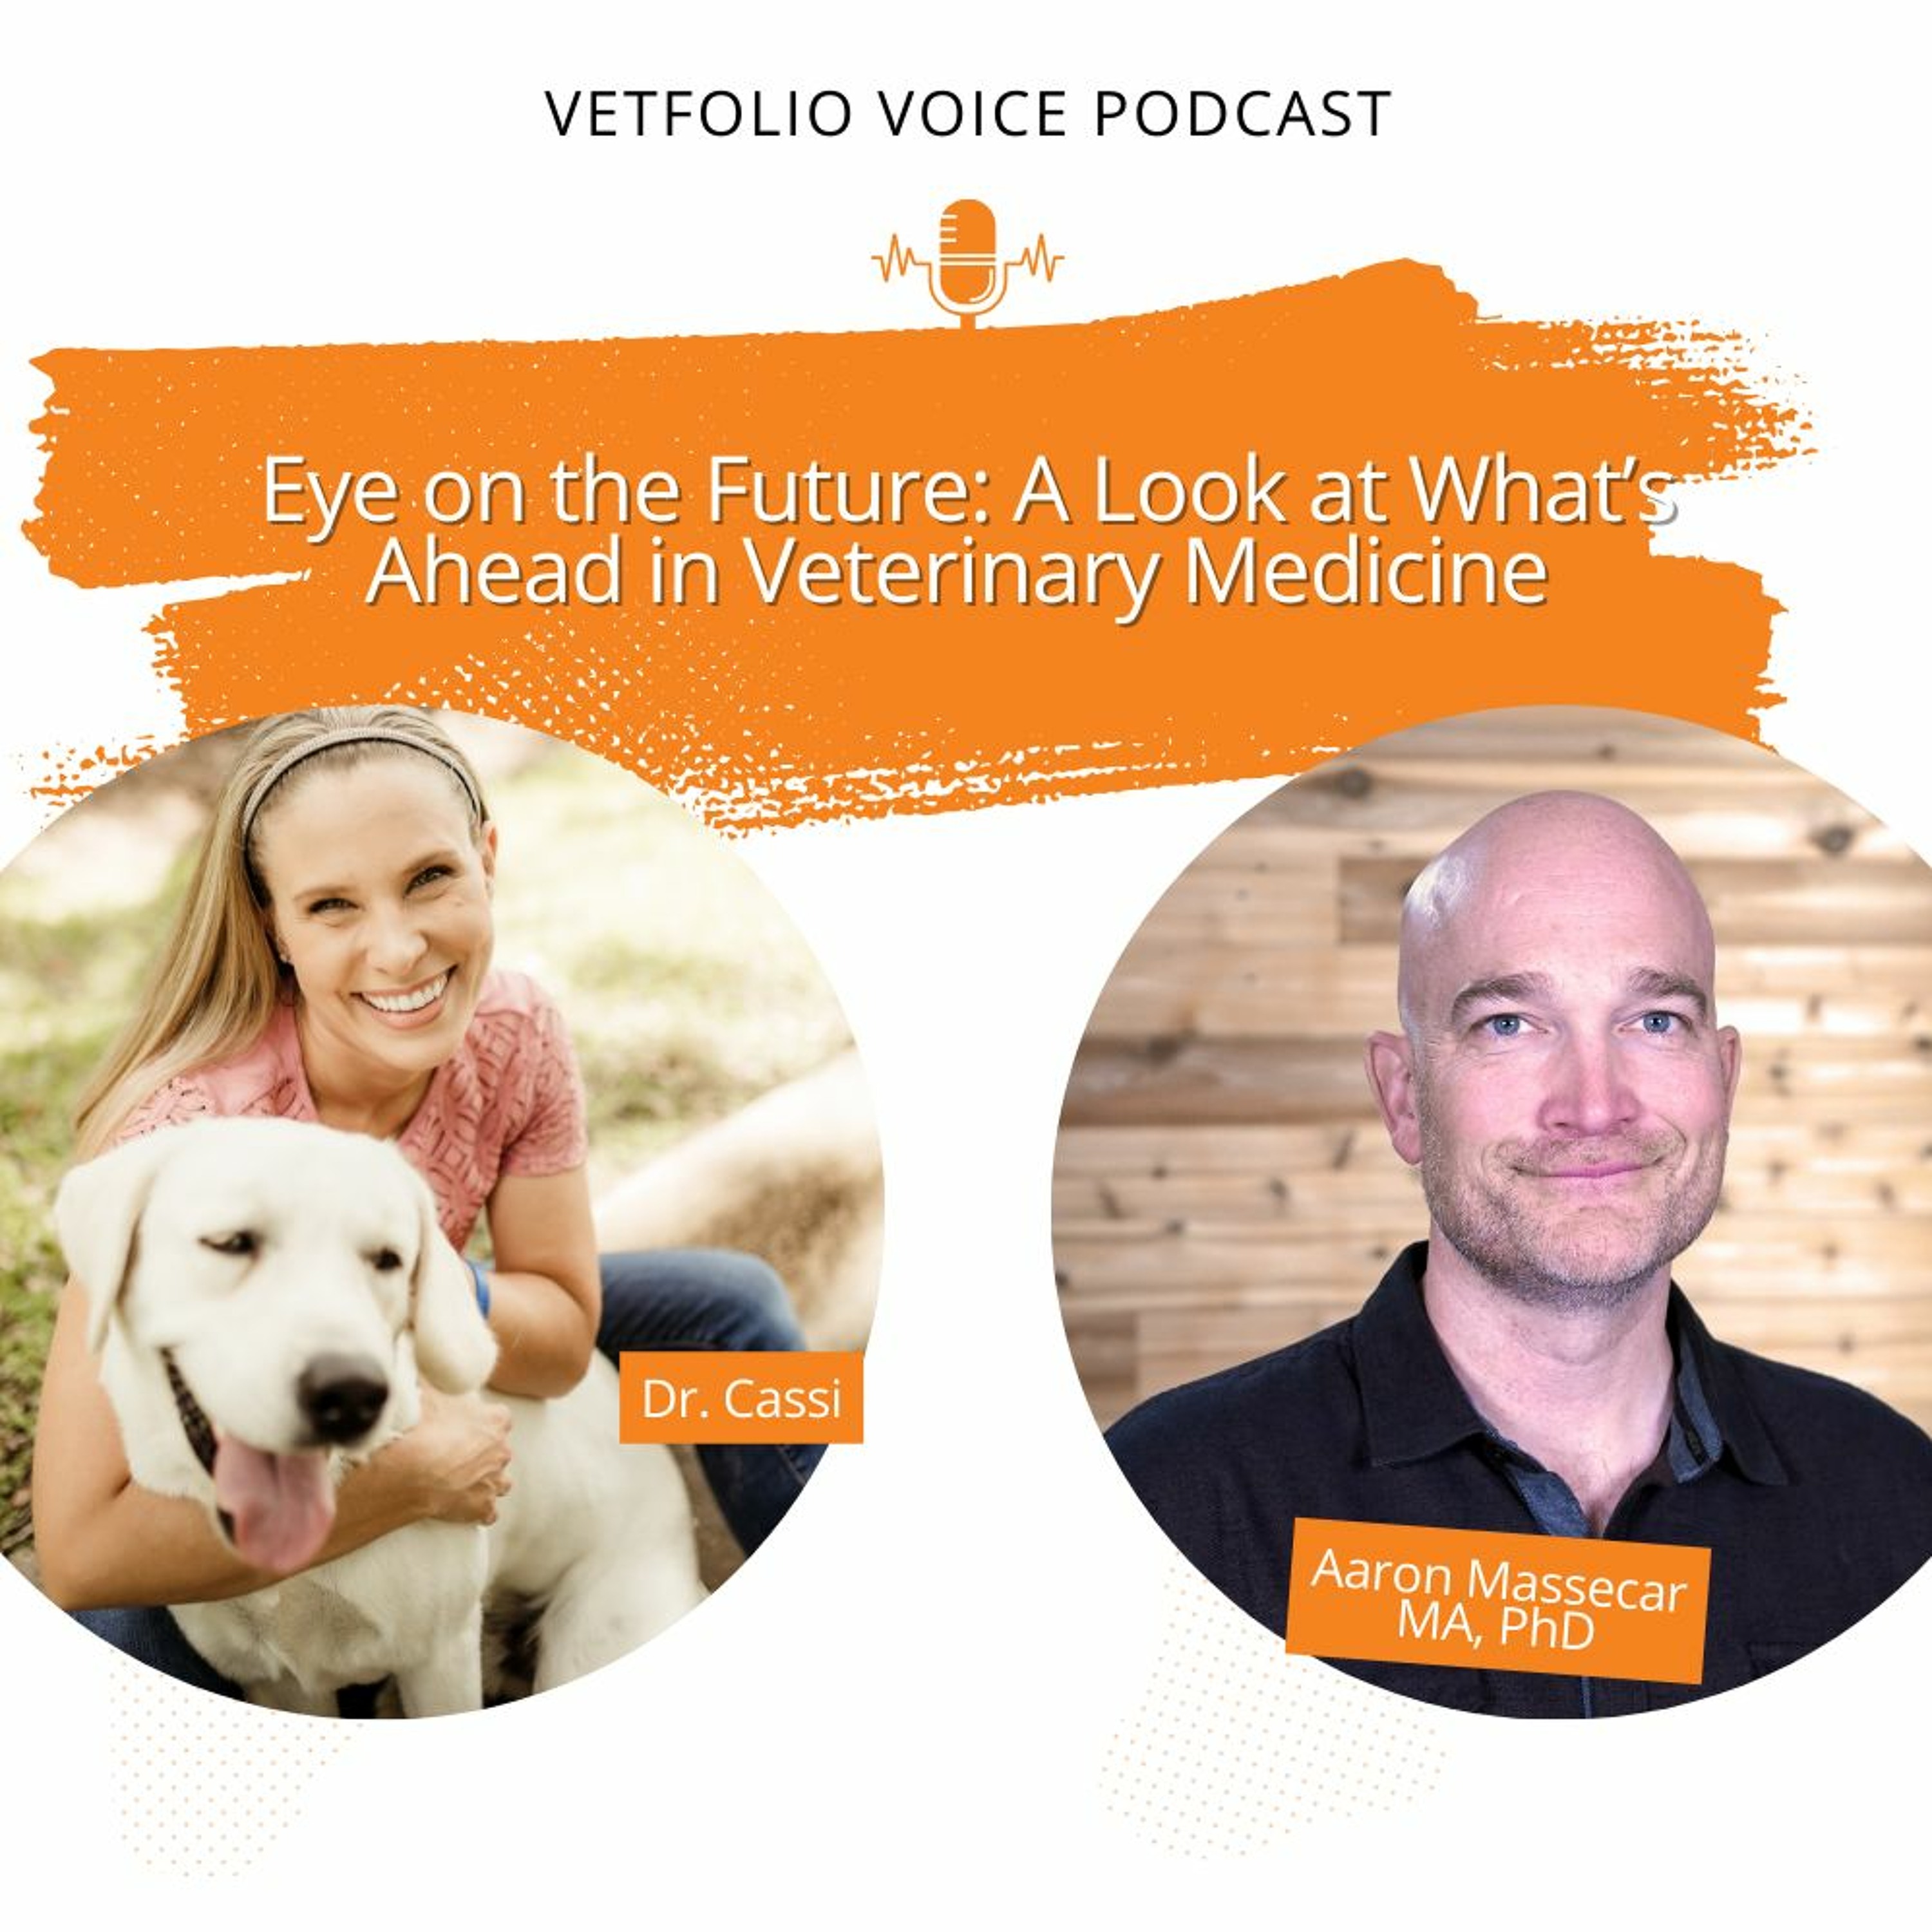 Eye on the Future: A Look at What’s Ahead in Veterinary Medicine